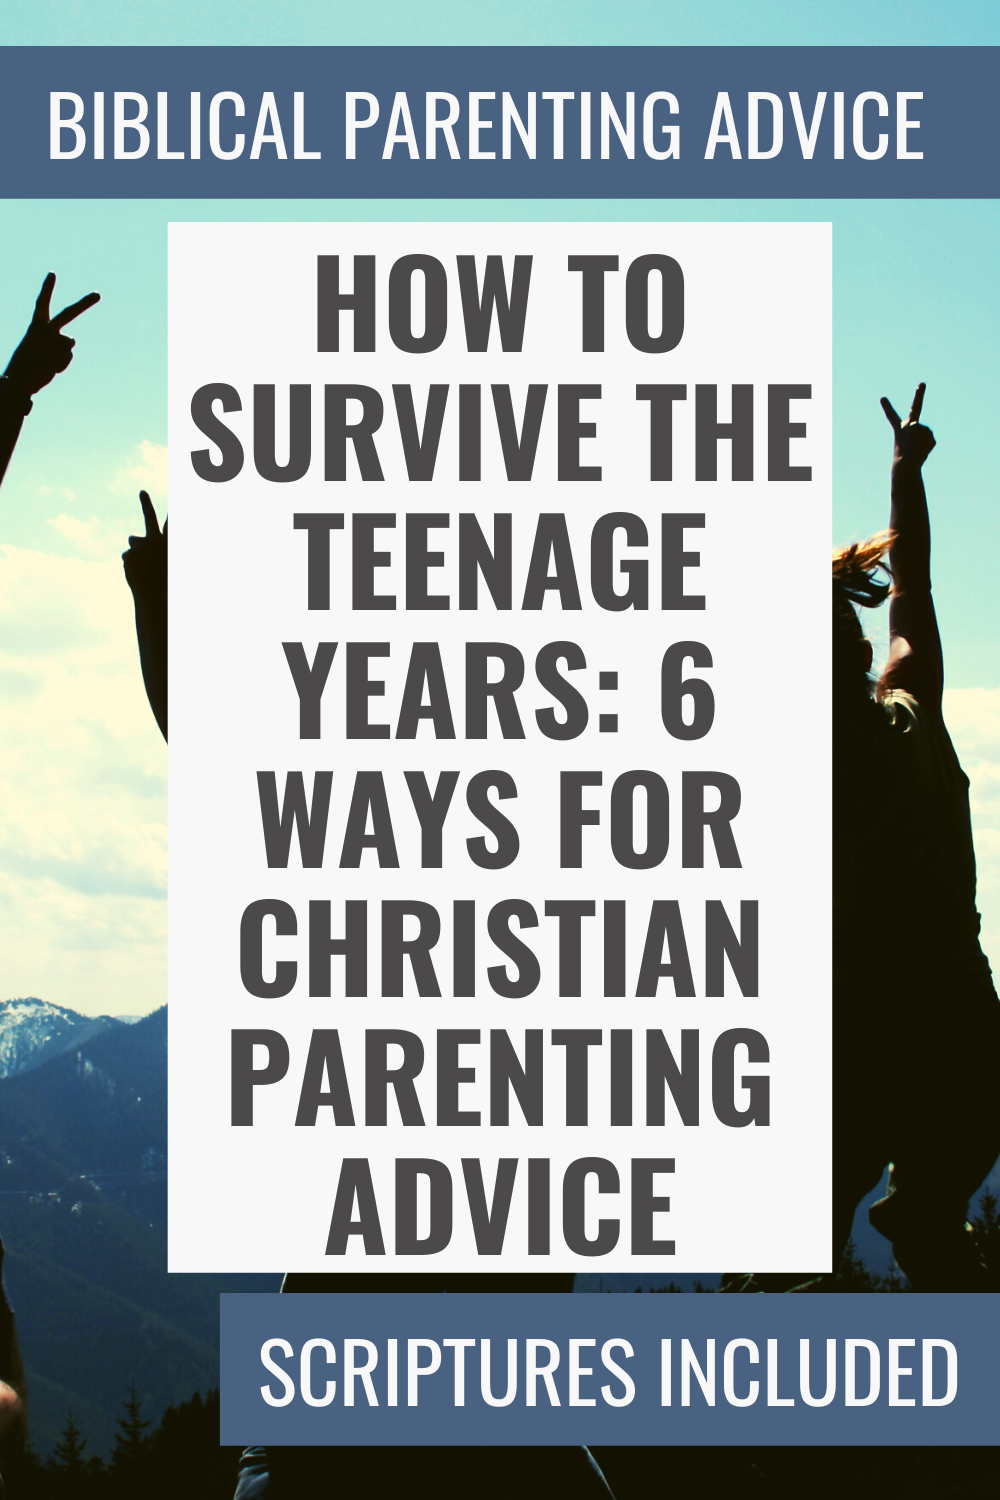 https://howtoloveyourteenager.com/wp-content/uploads/2021/02/How-to-Survive-the-Teenage-Years-6-Ways-for-Christian-Parenting-Advice-Pin-Image-1.png